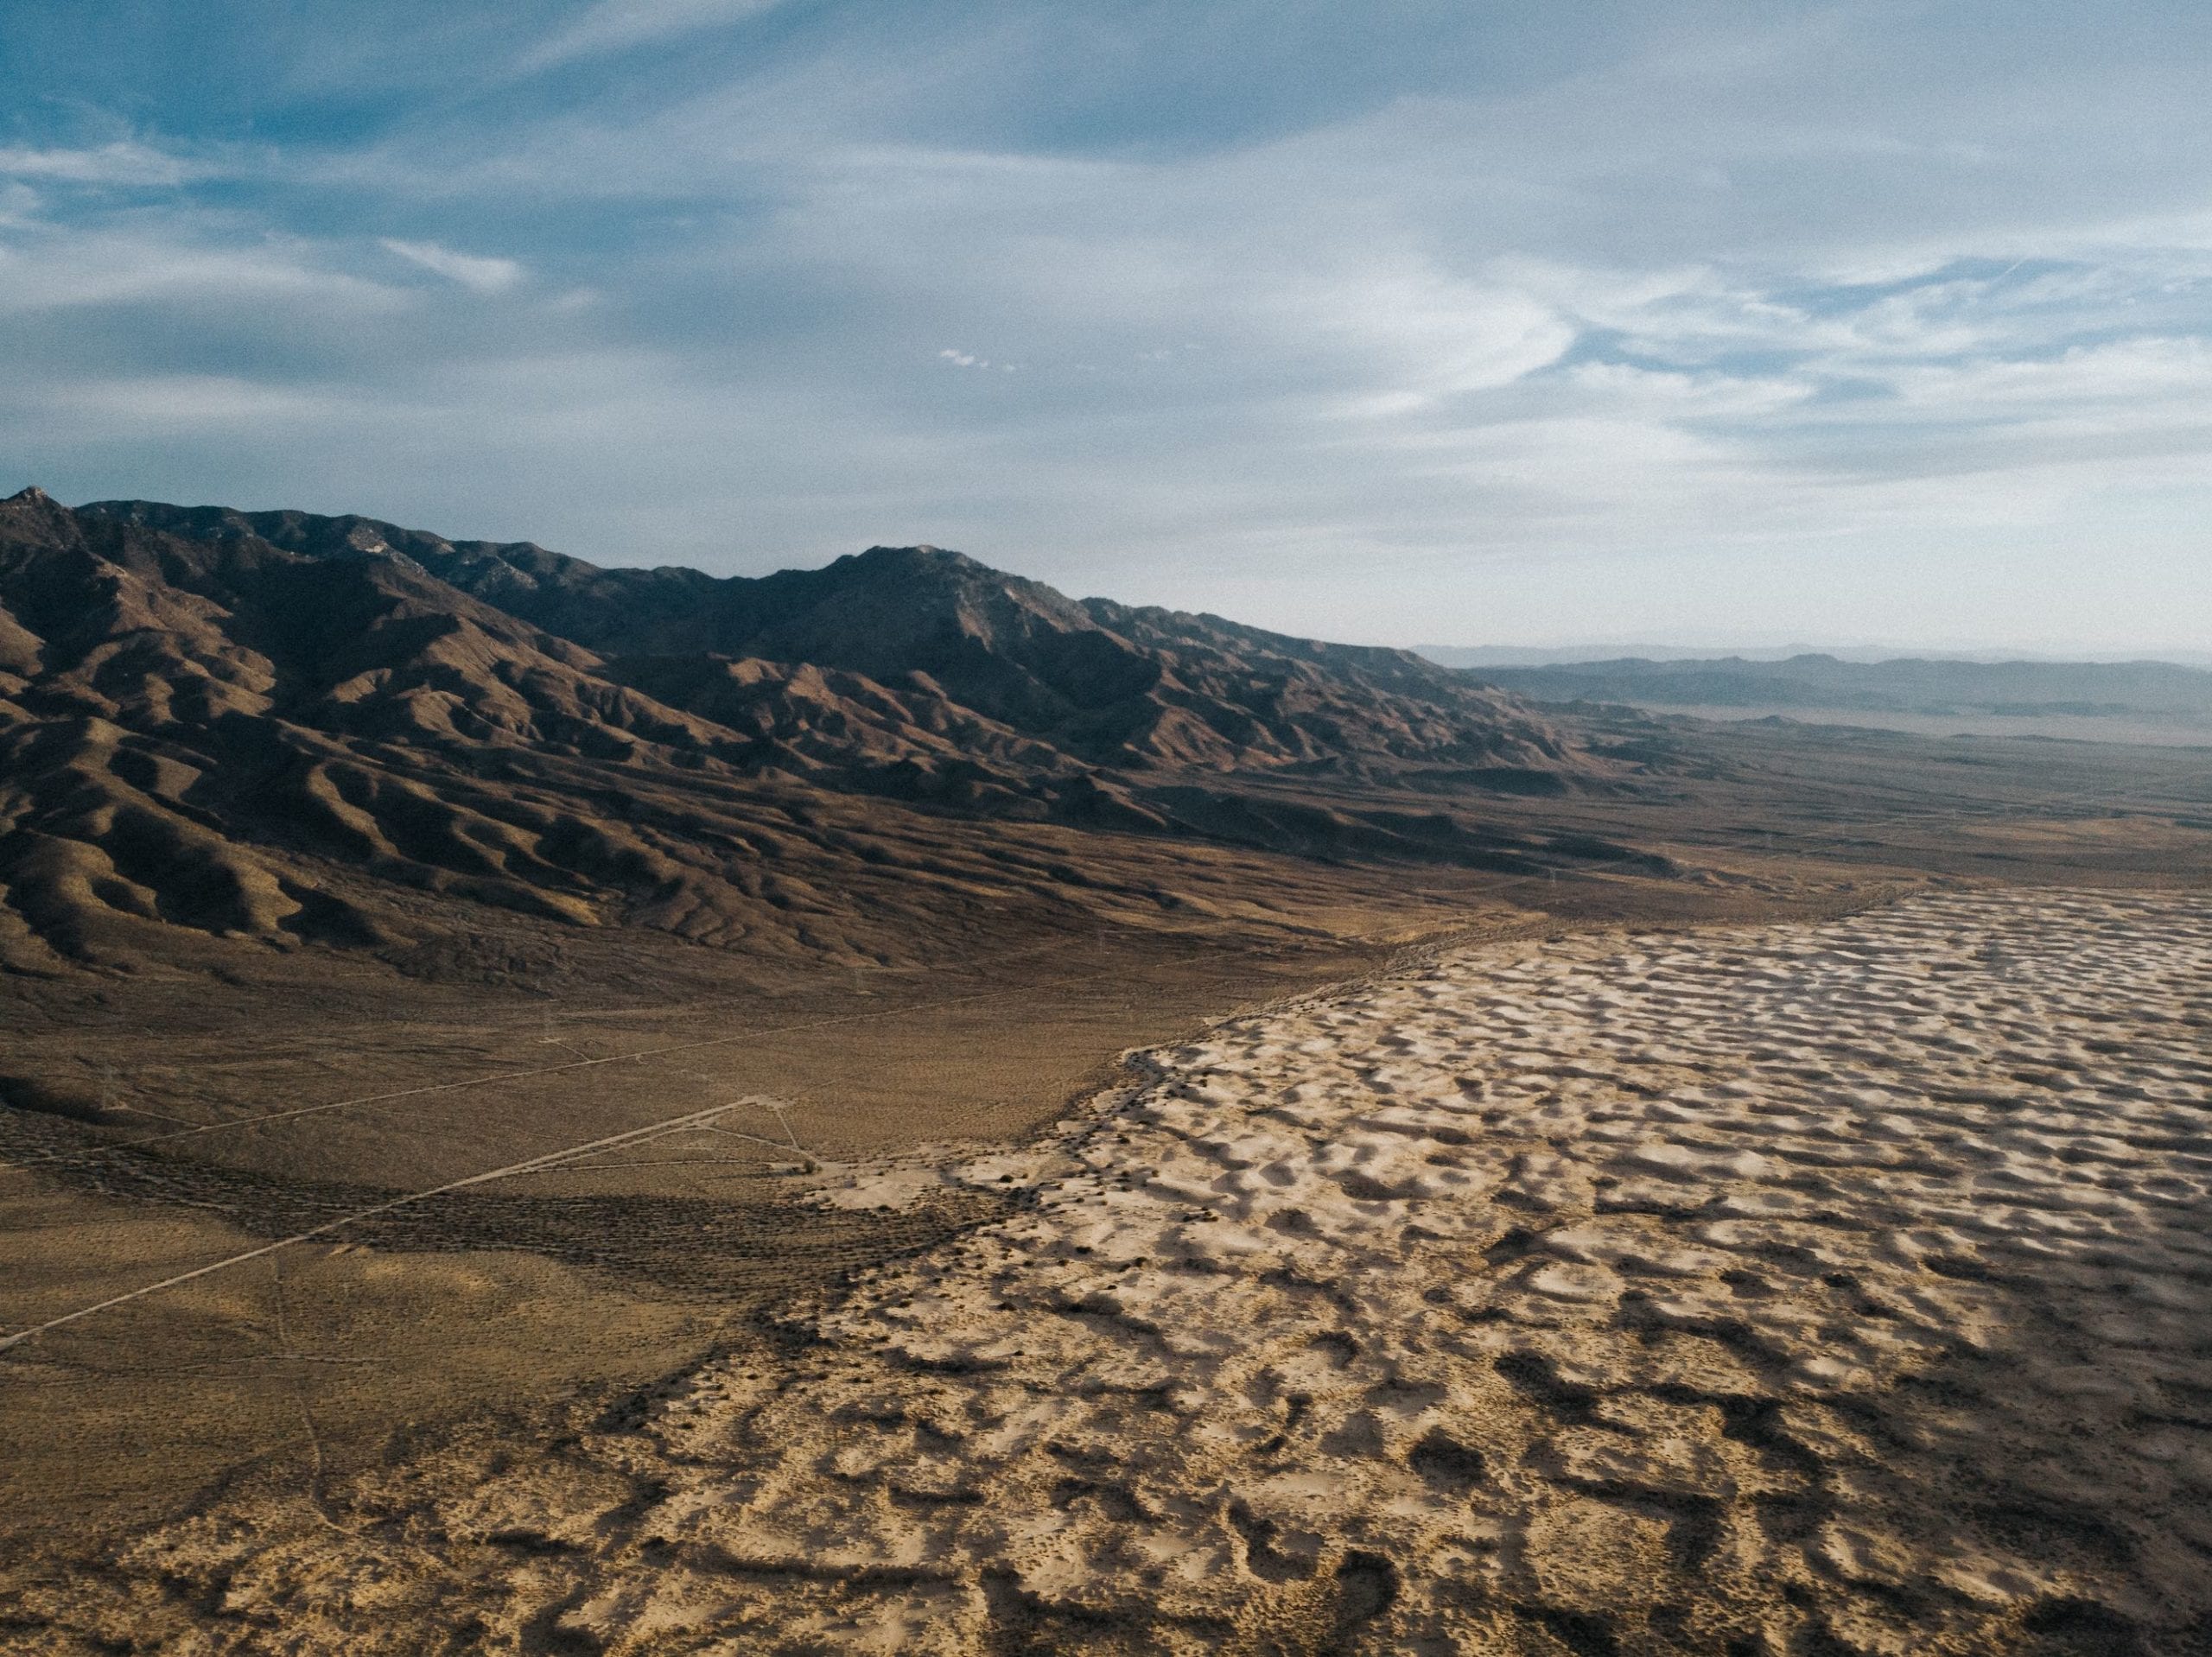 DJI View of a desert with hills